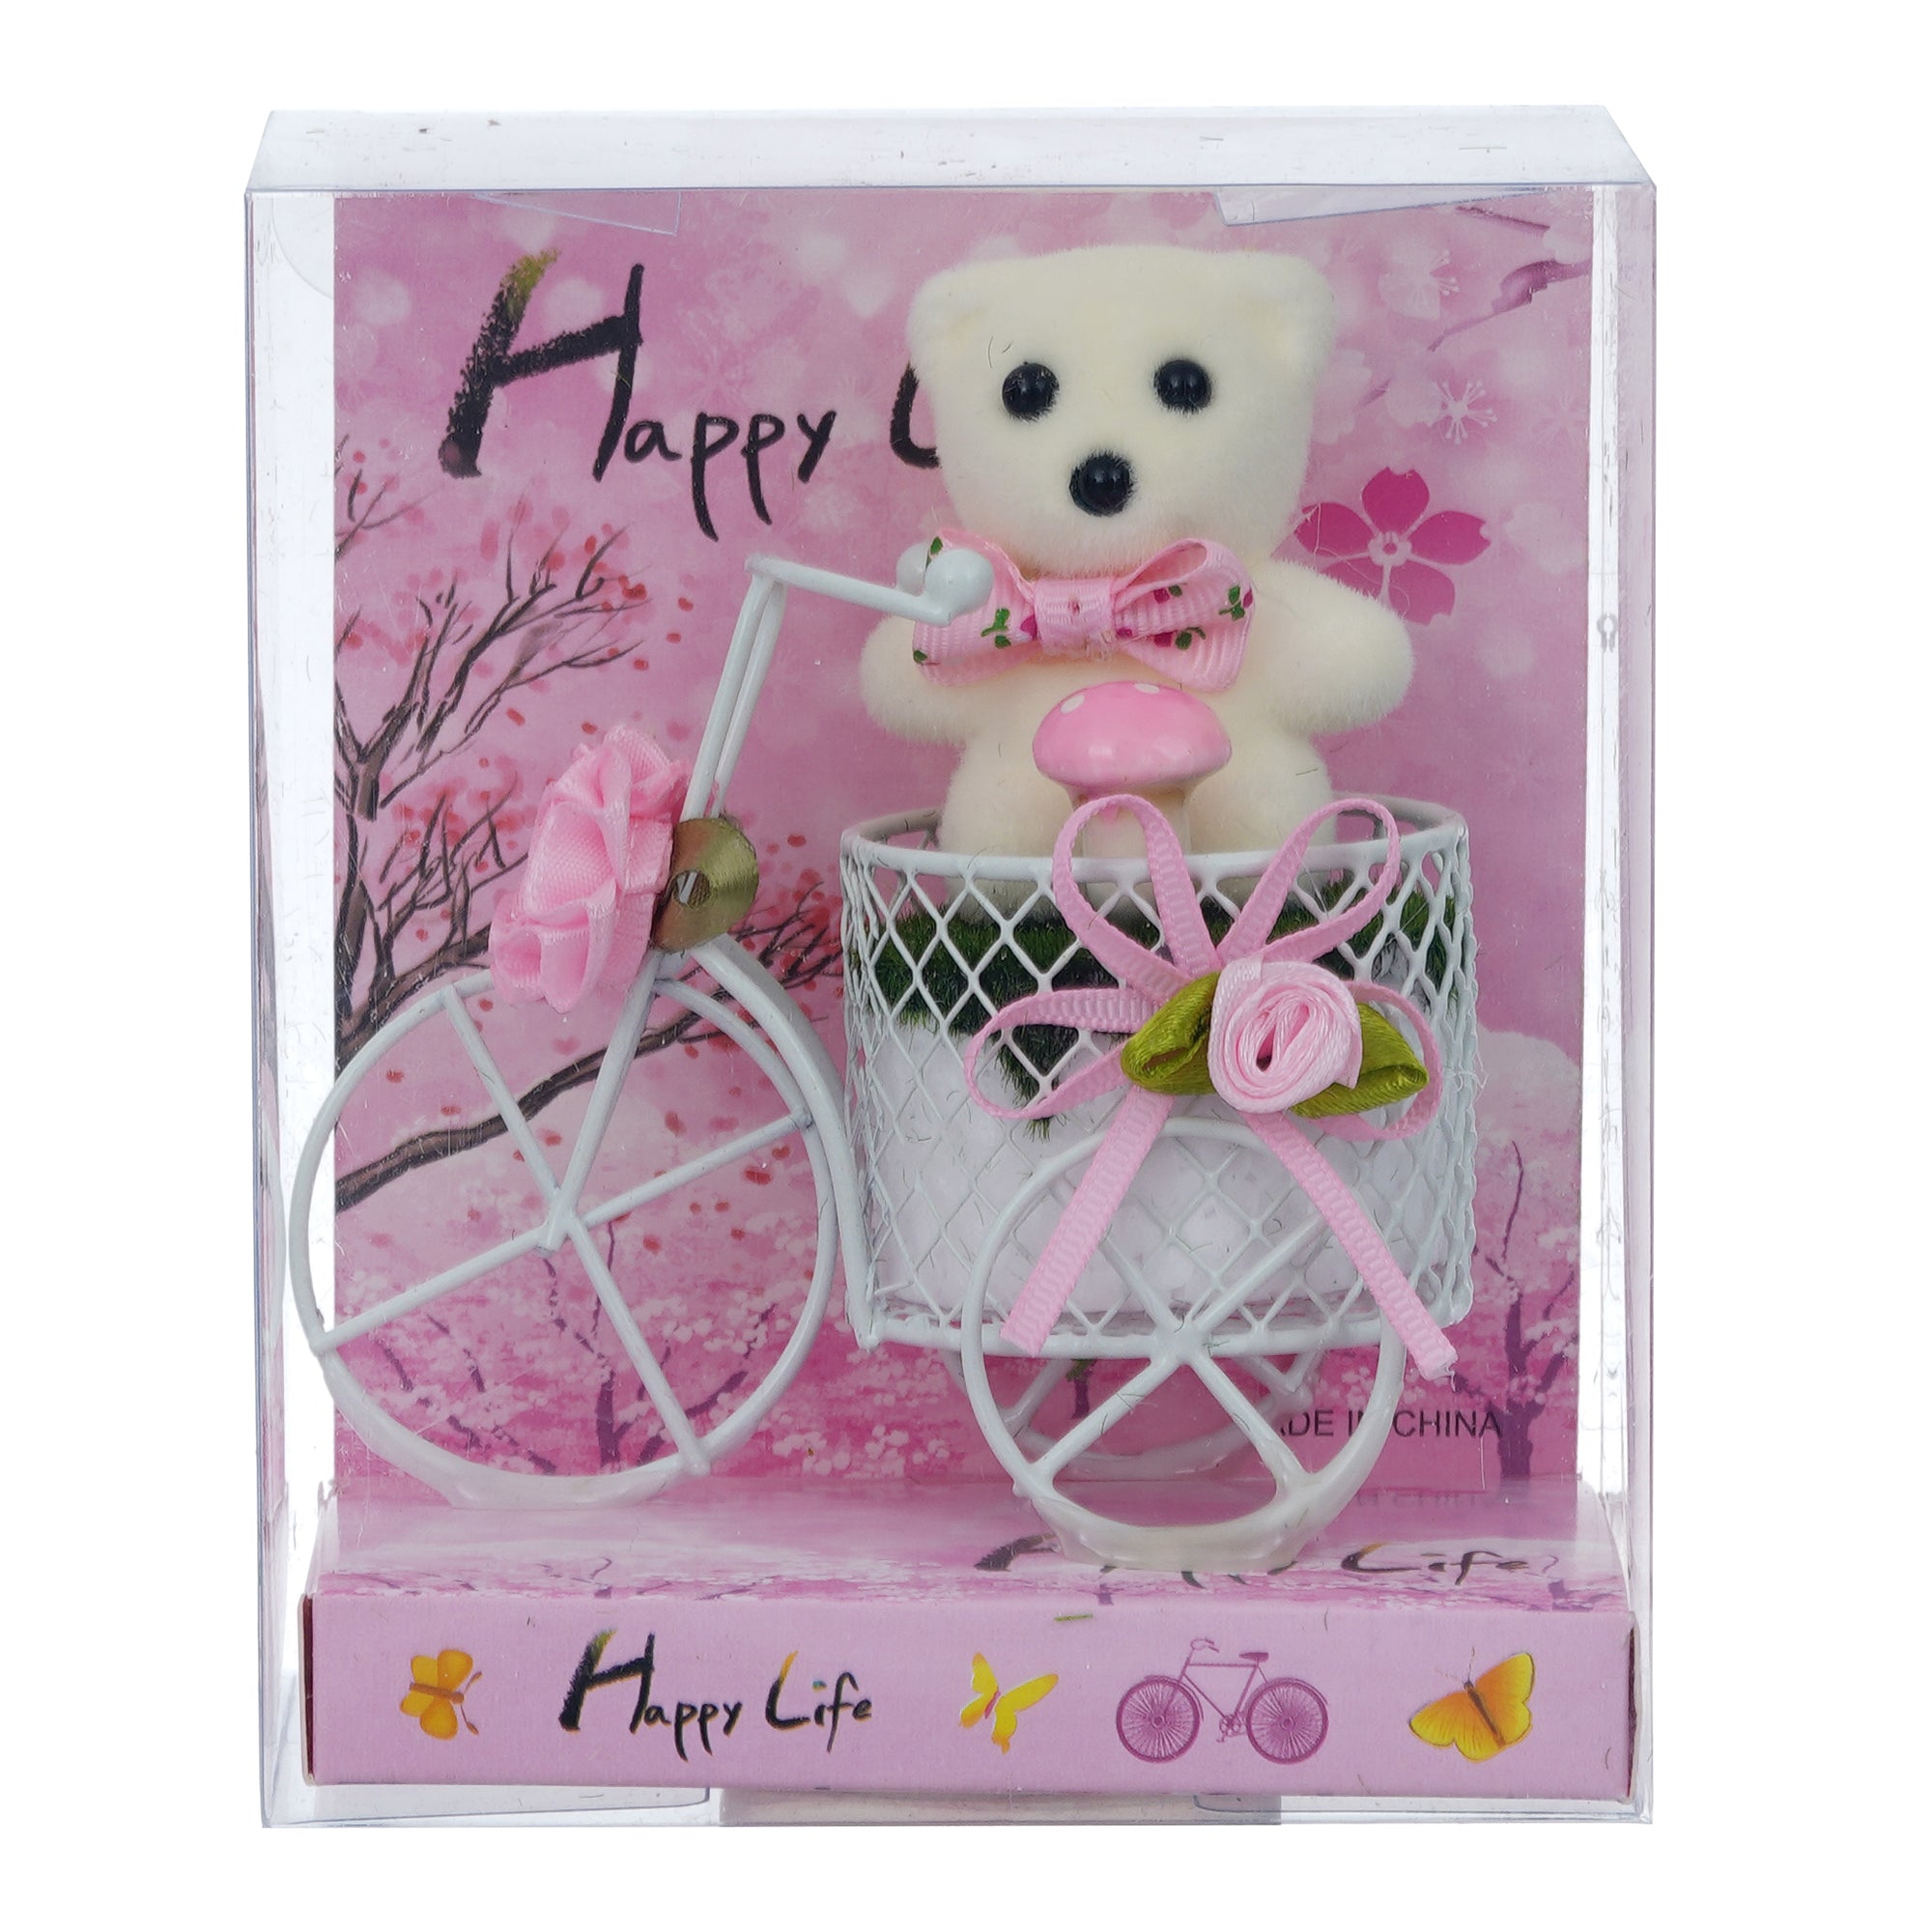 Valentine Combo of Colorful Sweet Love Girl & Boy Figurine, White Cycle with Teddy Bear and Rose Petals Gift Box 6